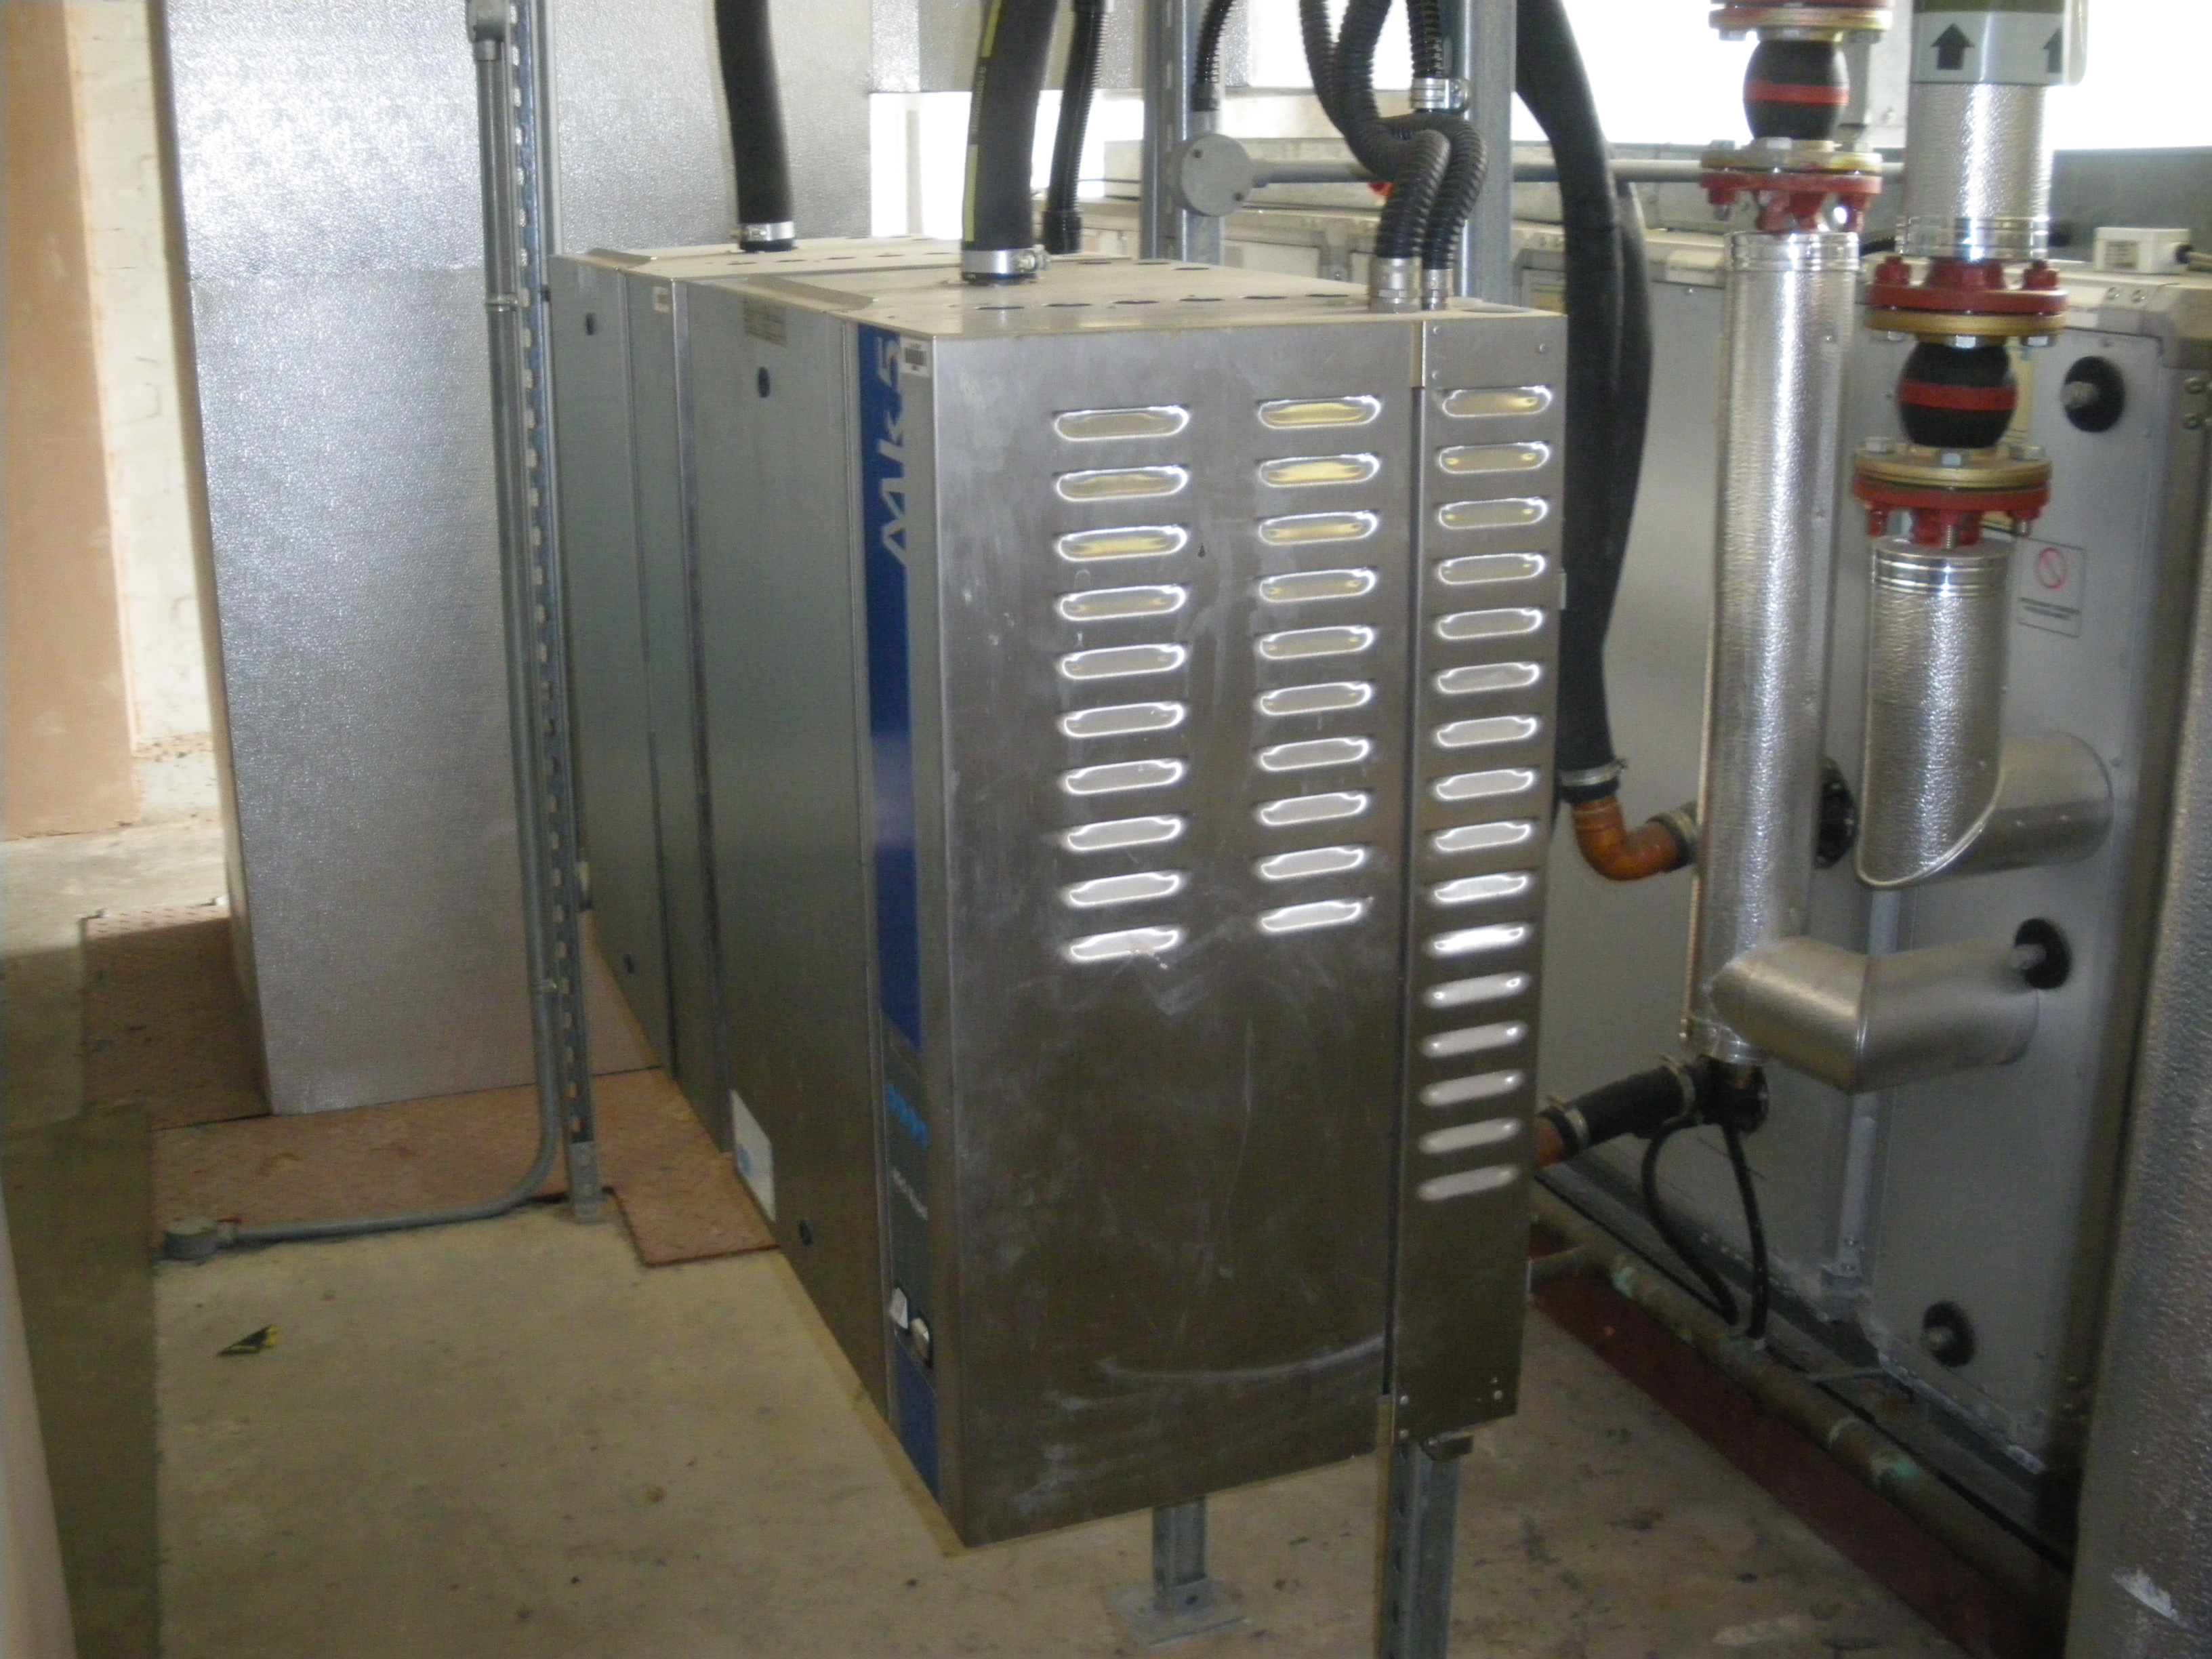 Steam humidifiers in the Business Centre ventilation plant